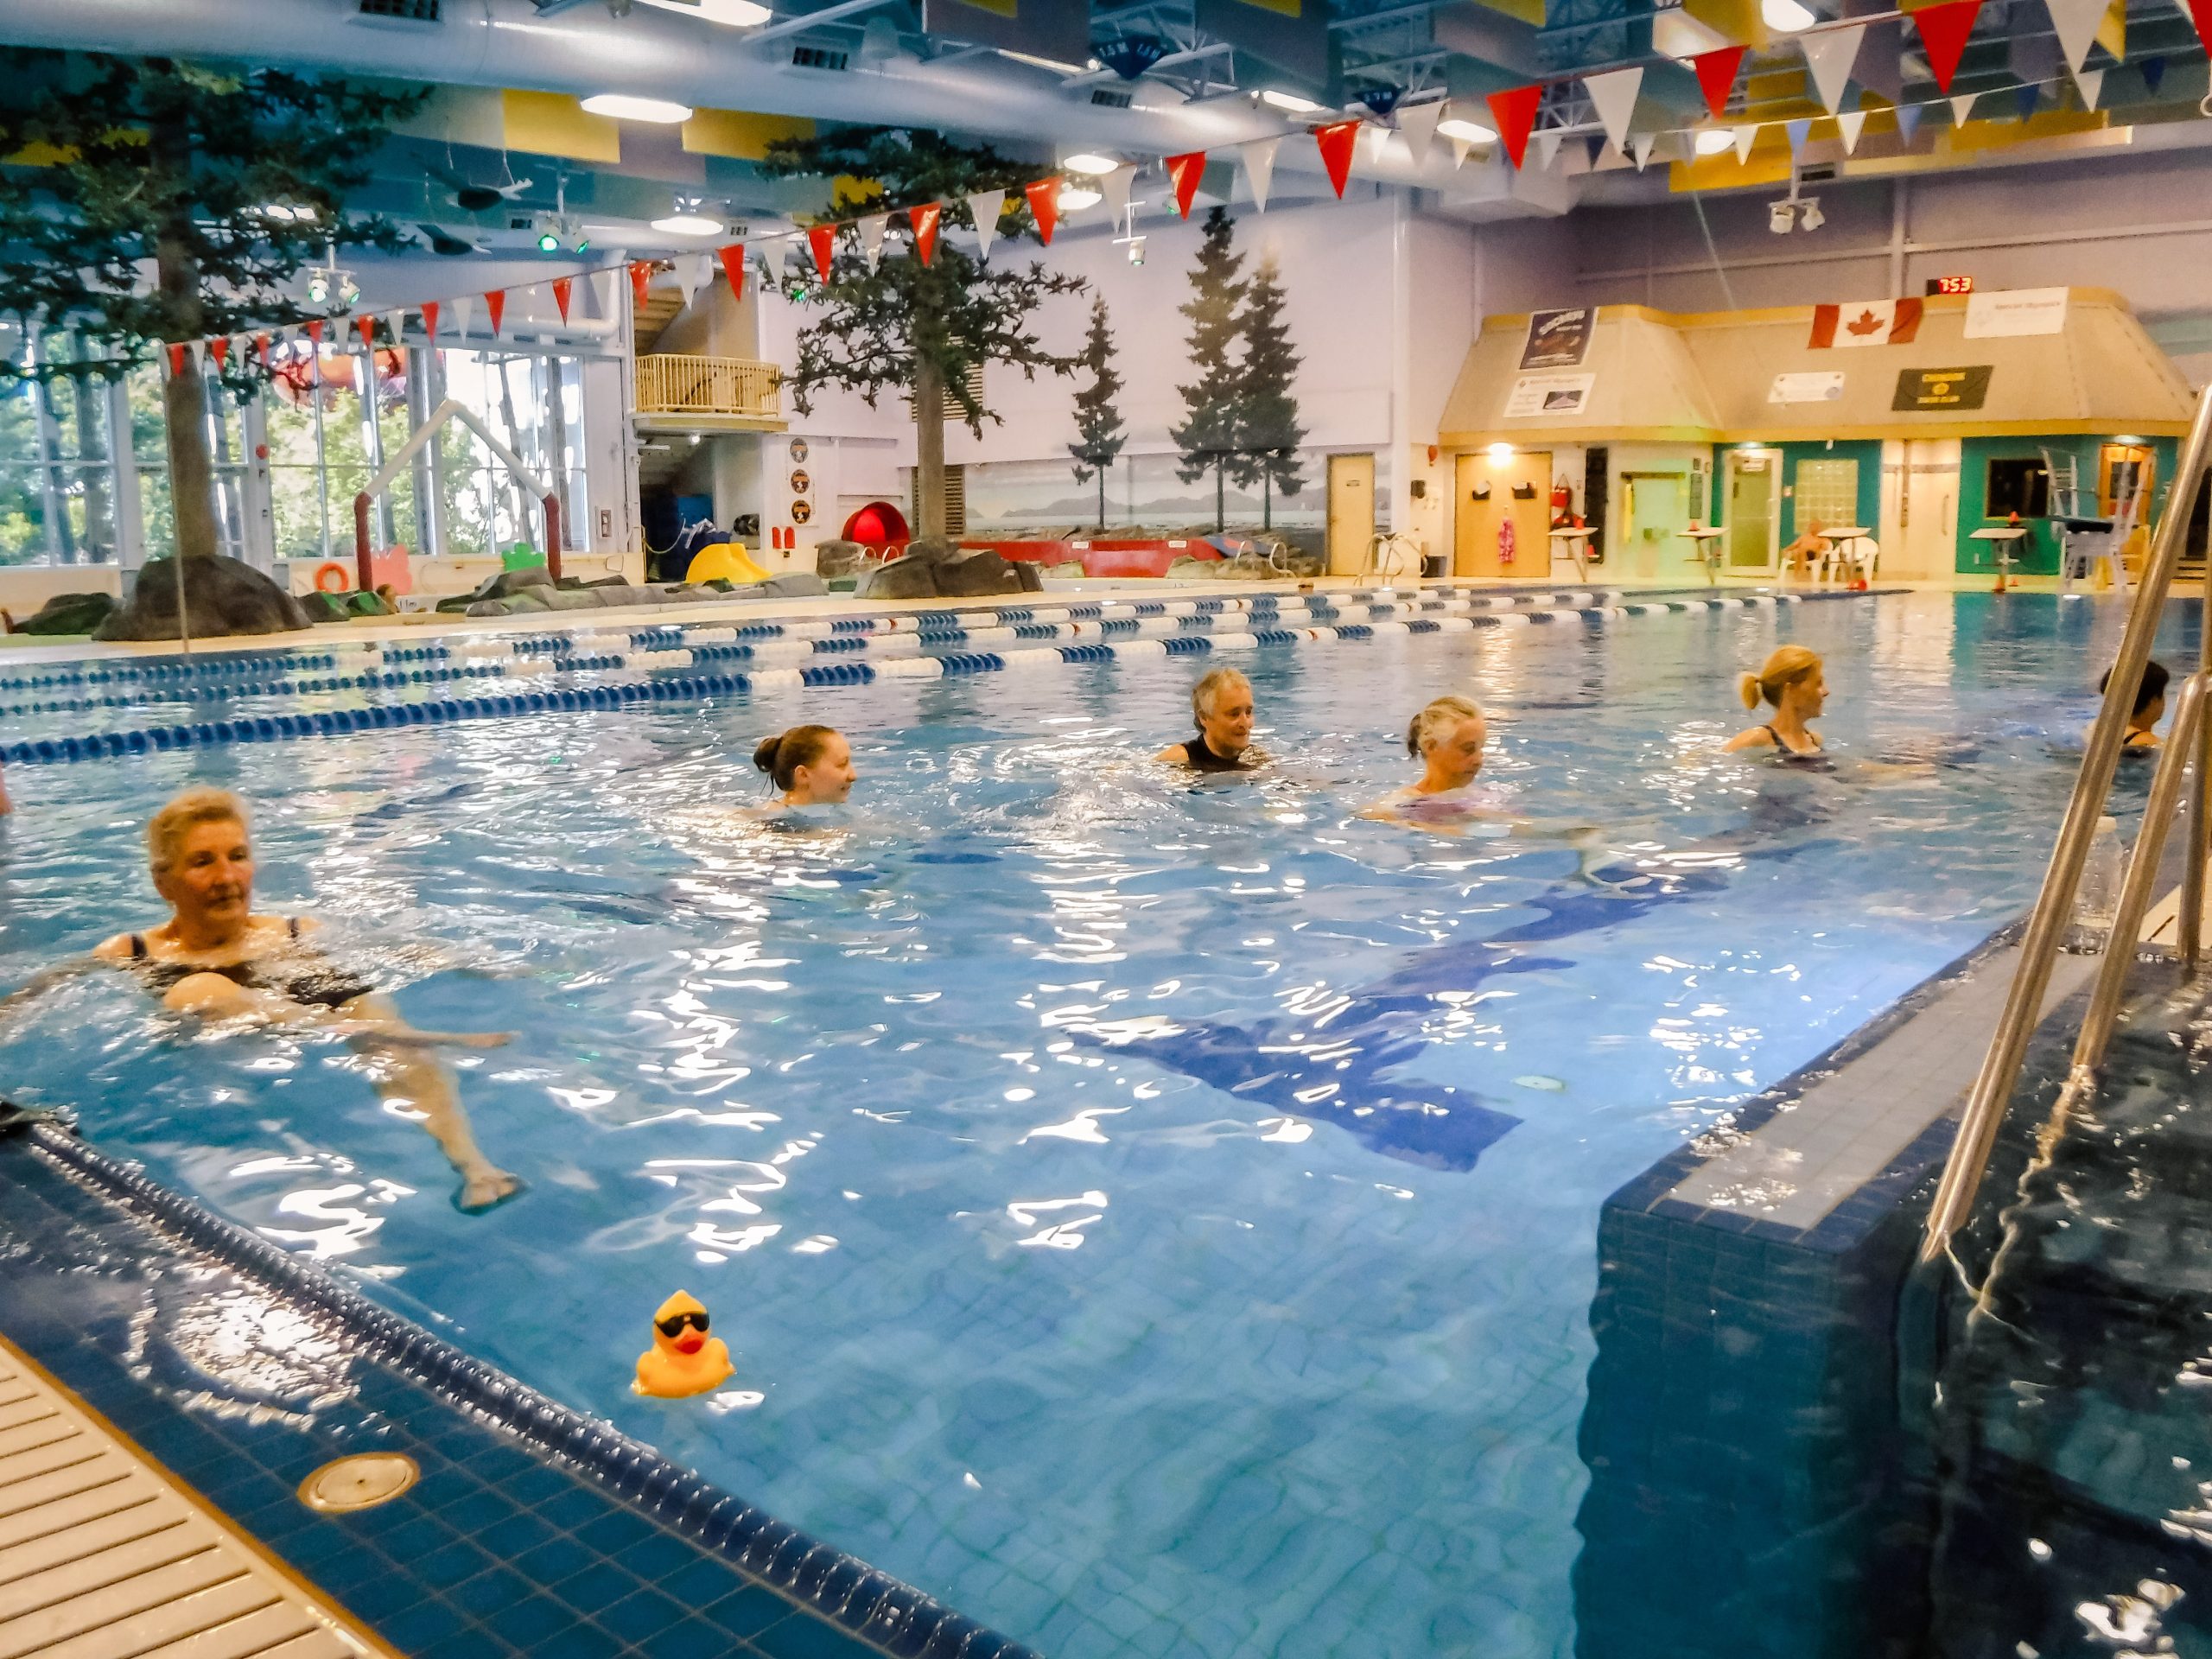 people taking part in an aquatic fitness class